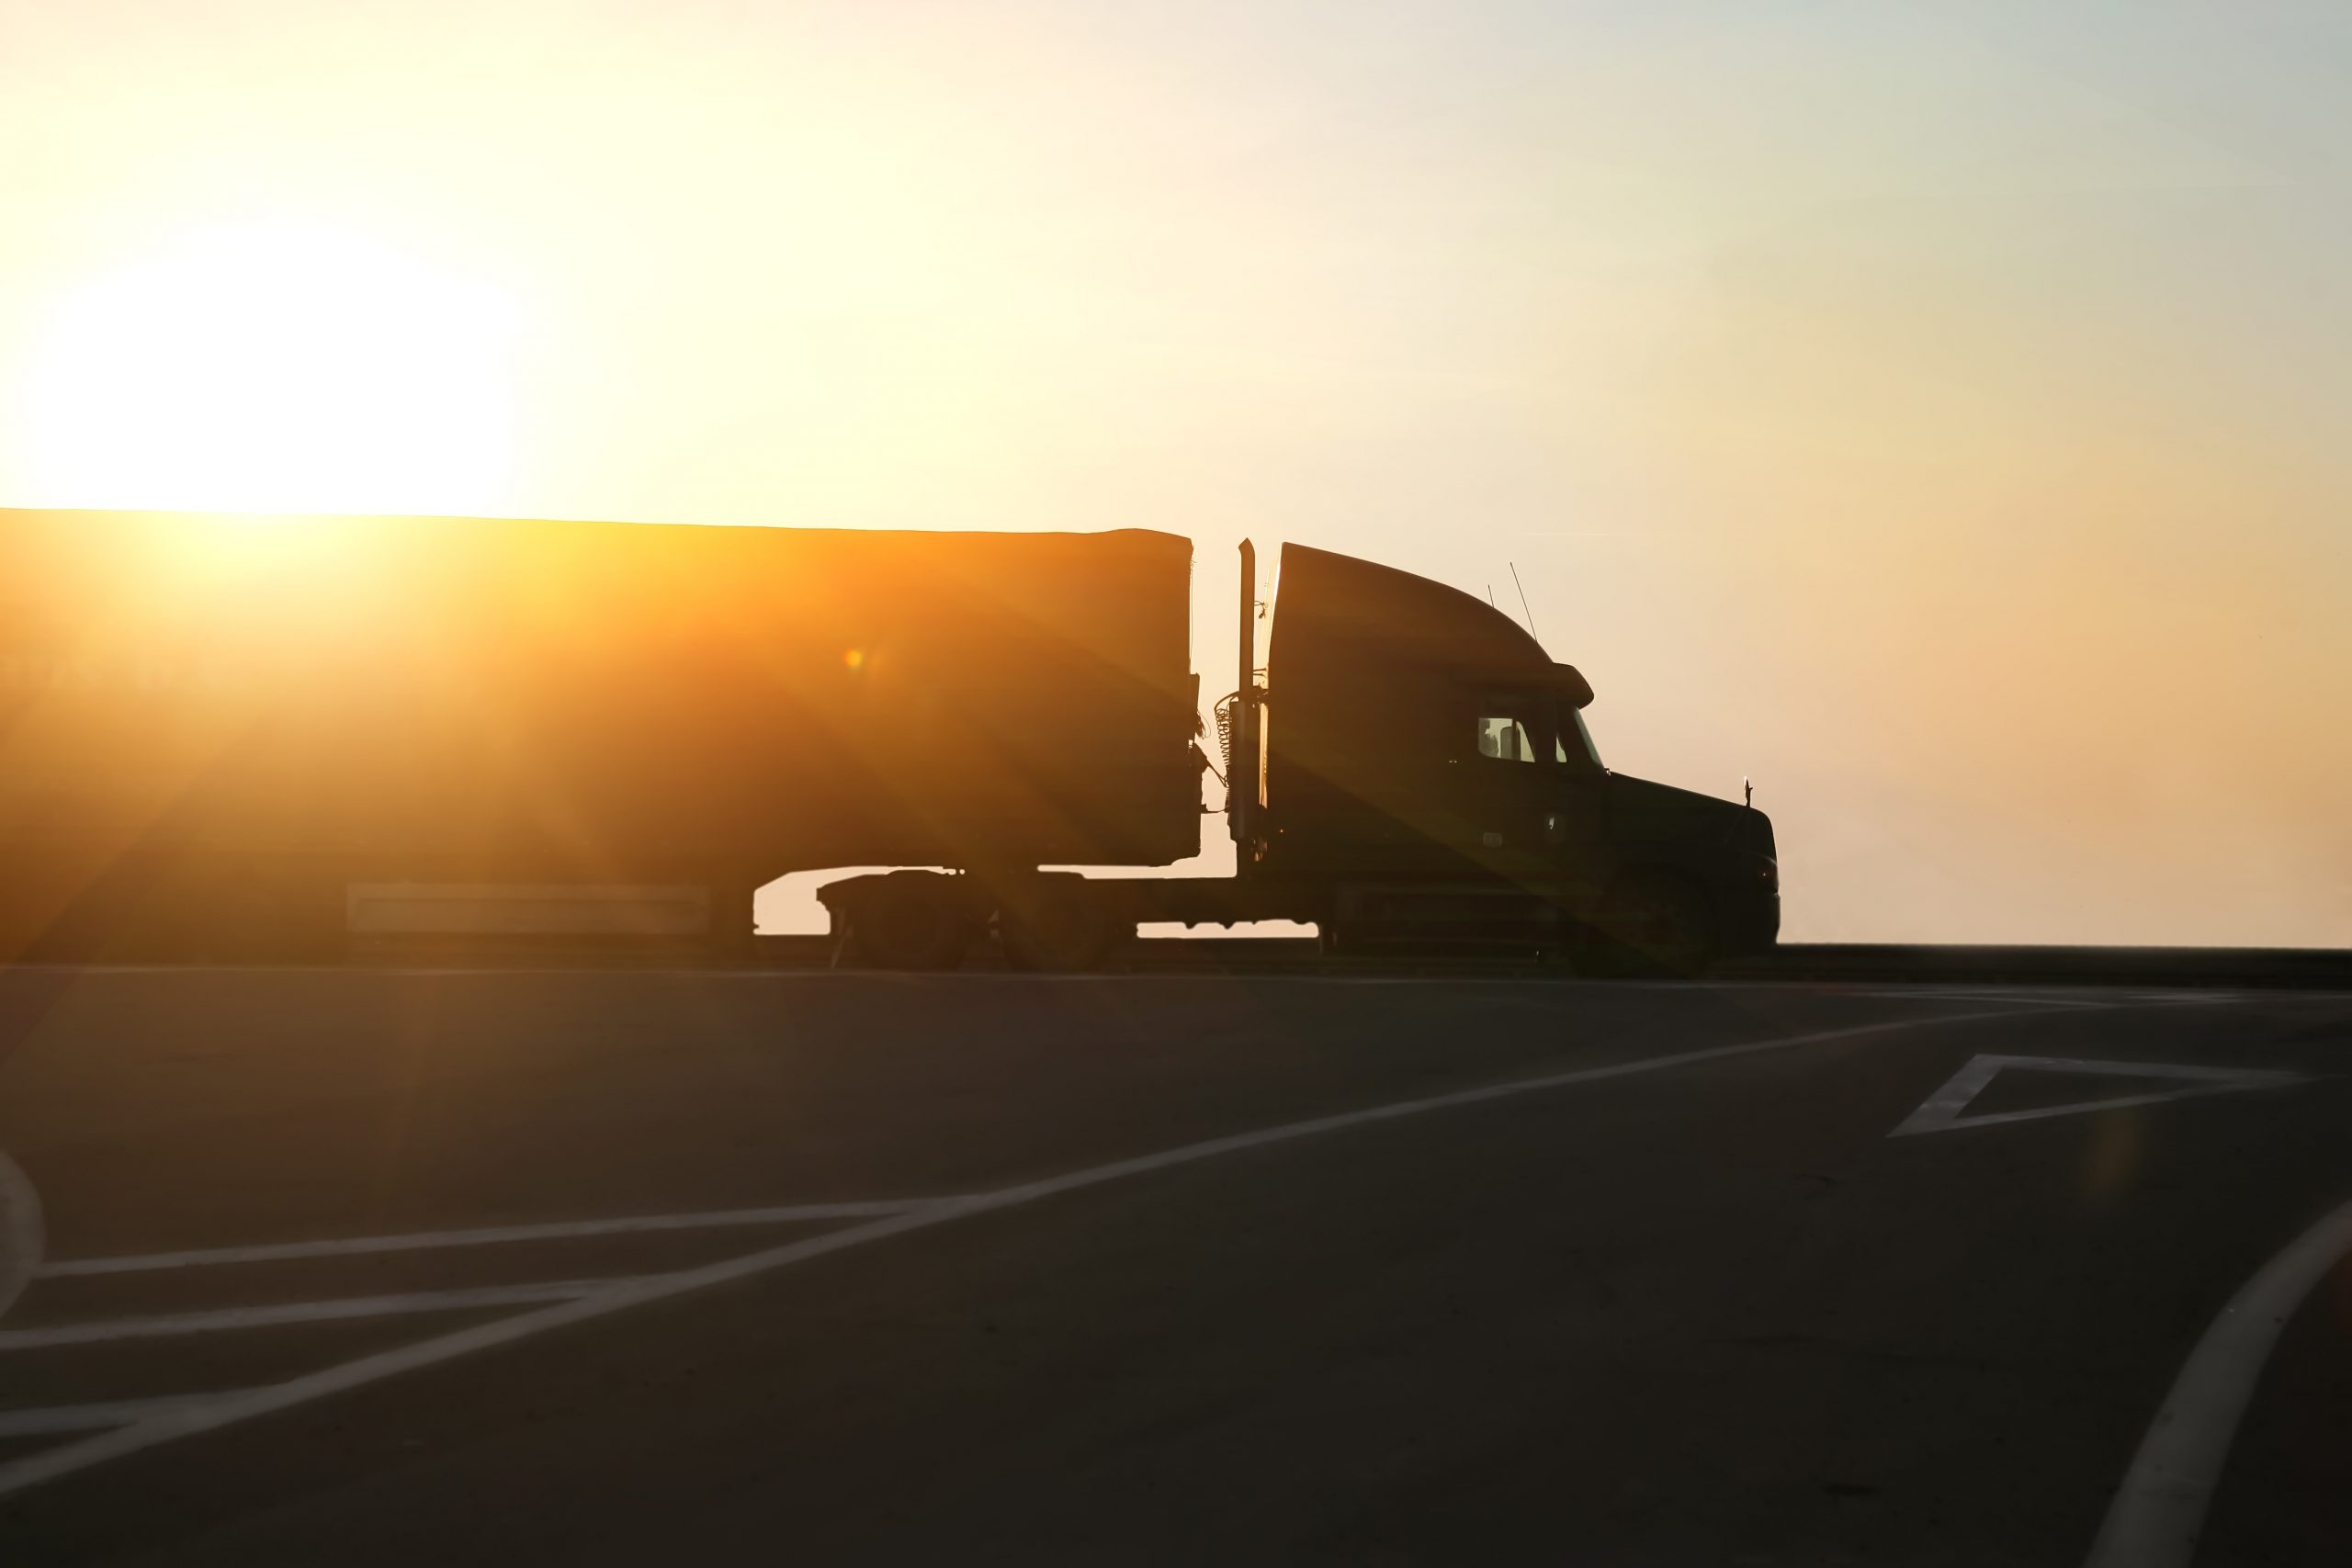 Truck at sunset